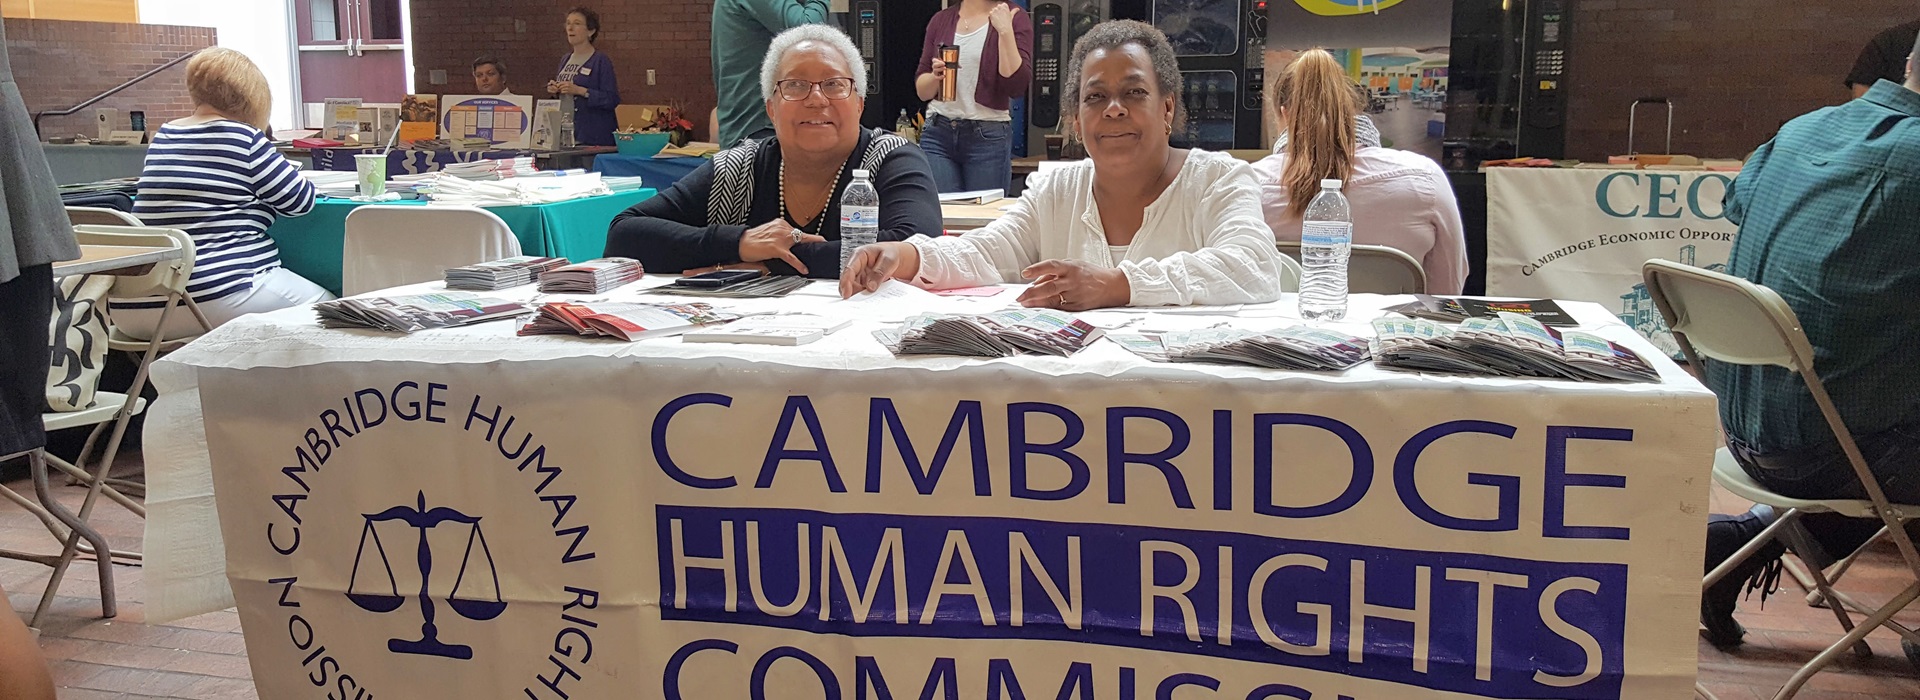 Members of the Human Rights Commission outreaching during the Fair and Affordable Housing Open House event